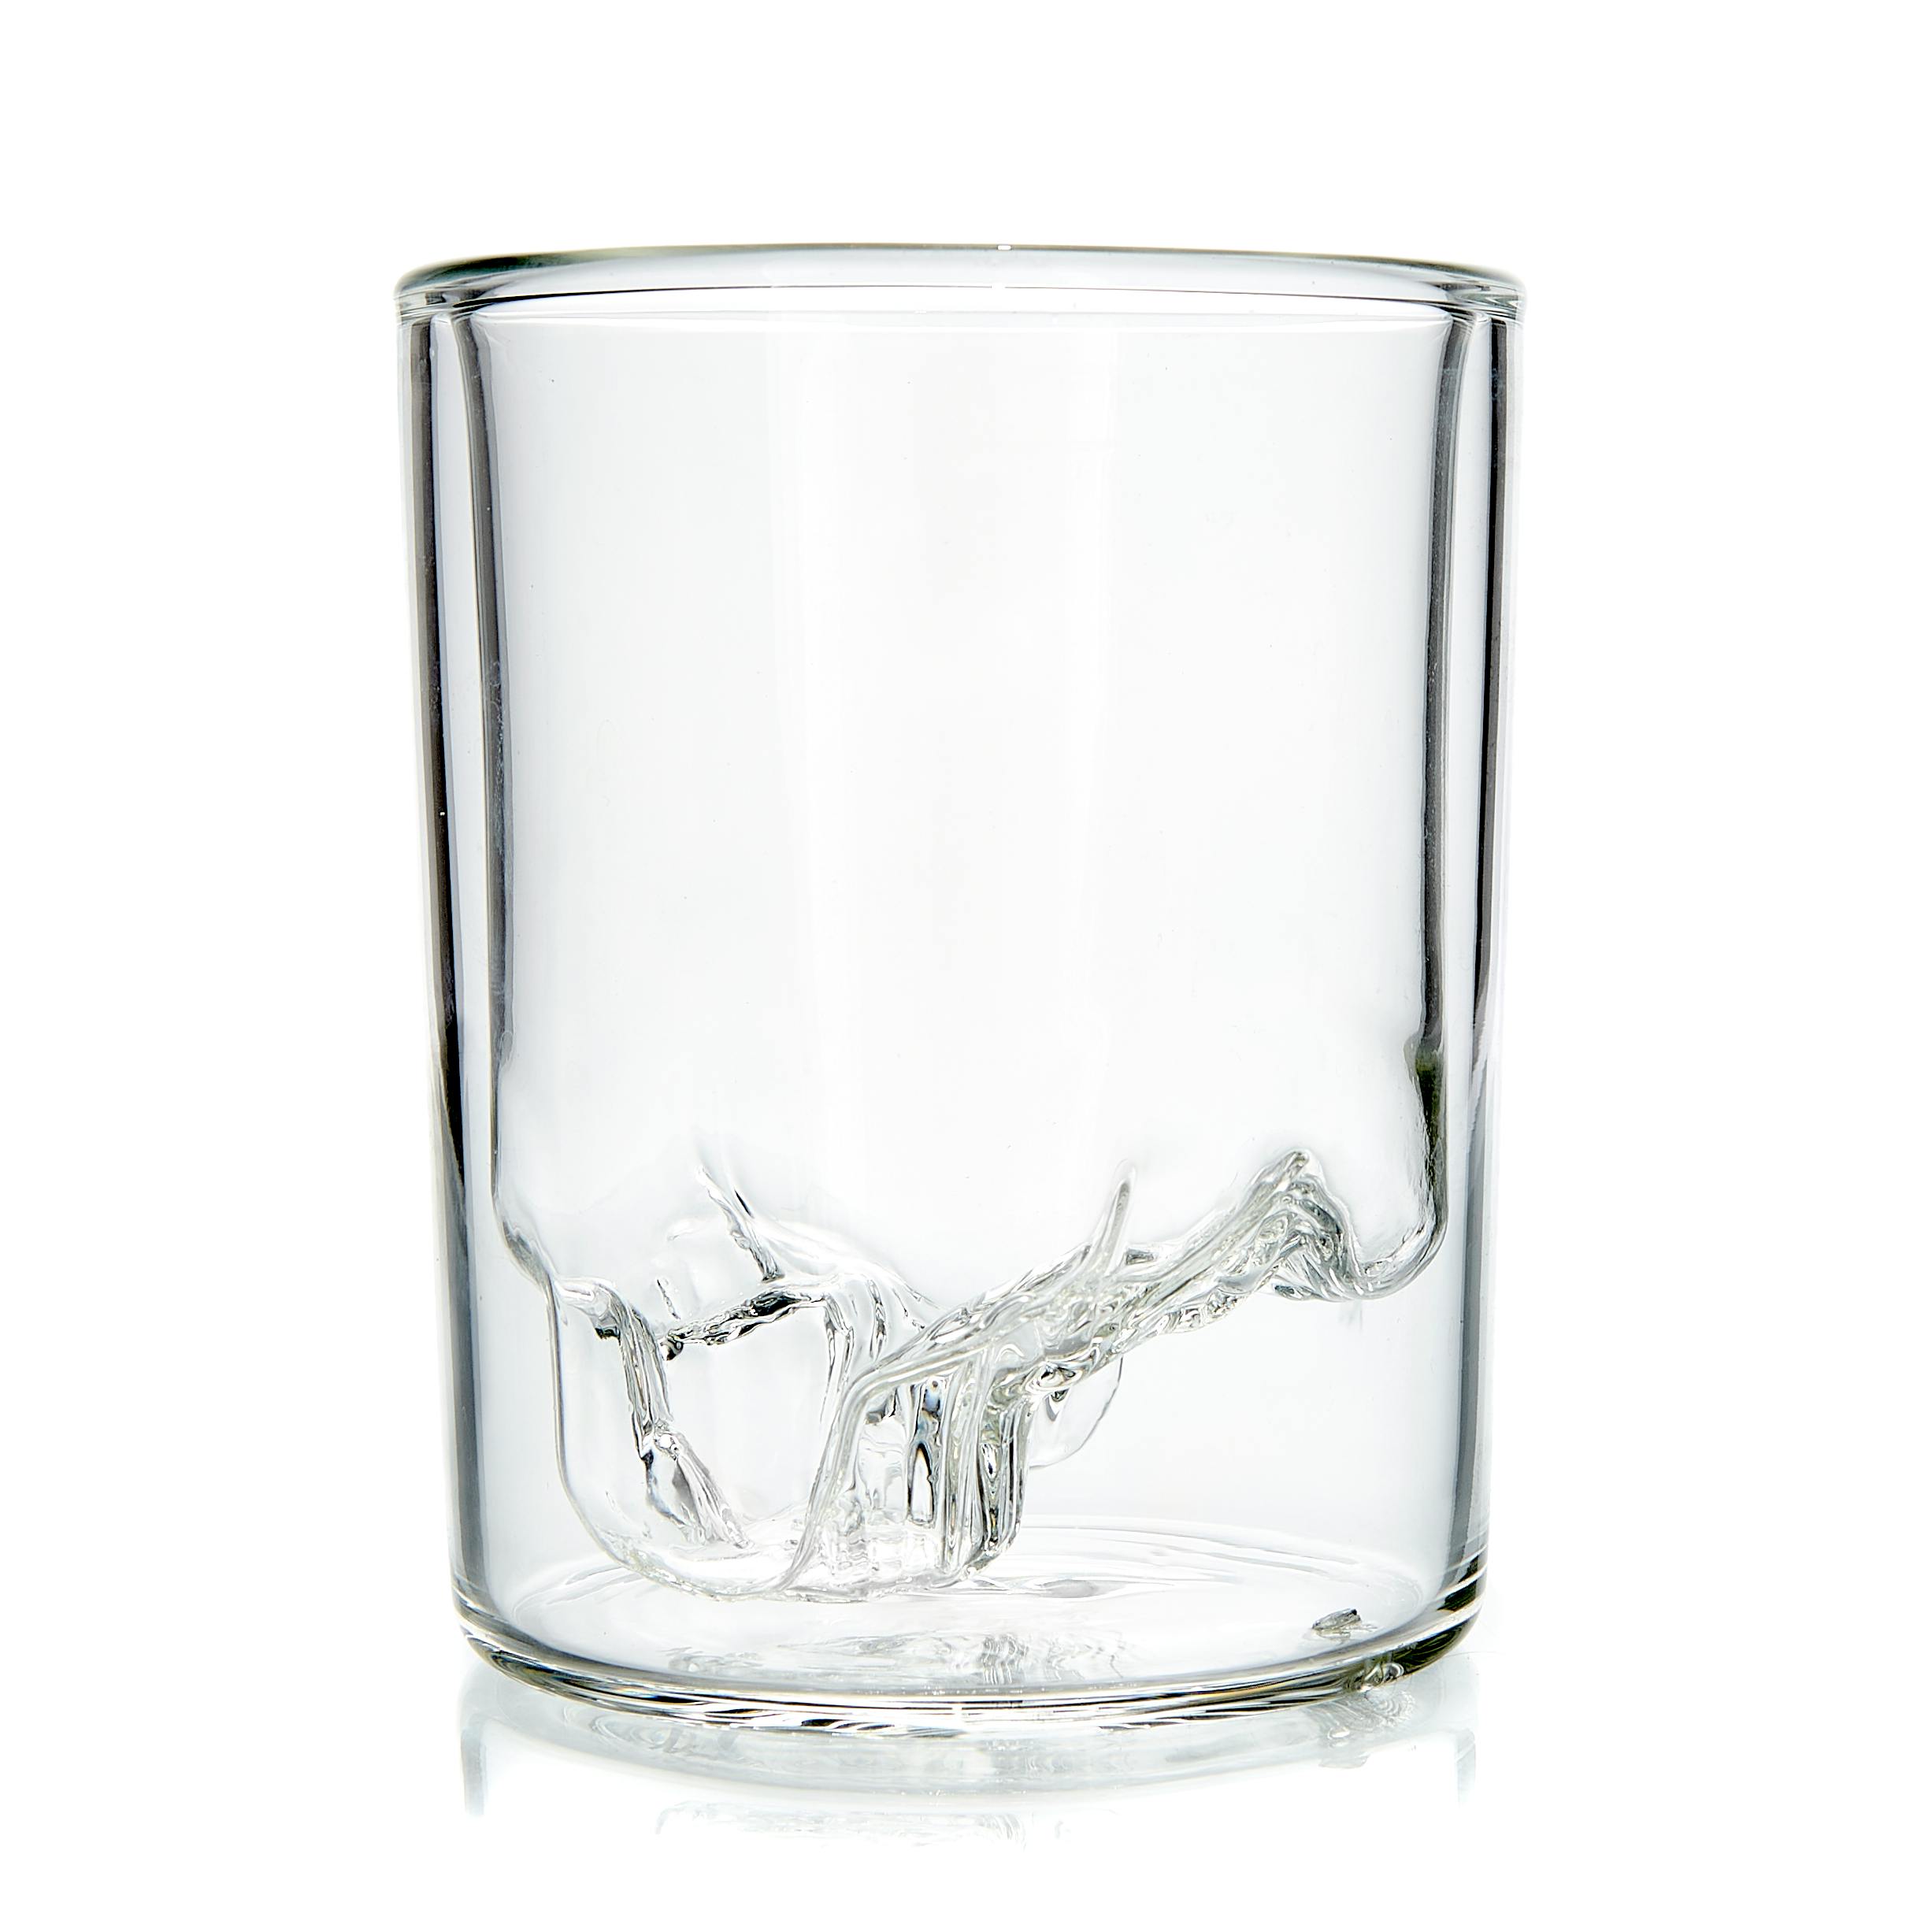 Early Times Shot Glass